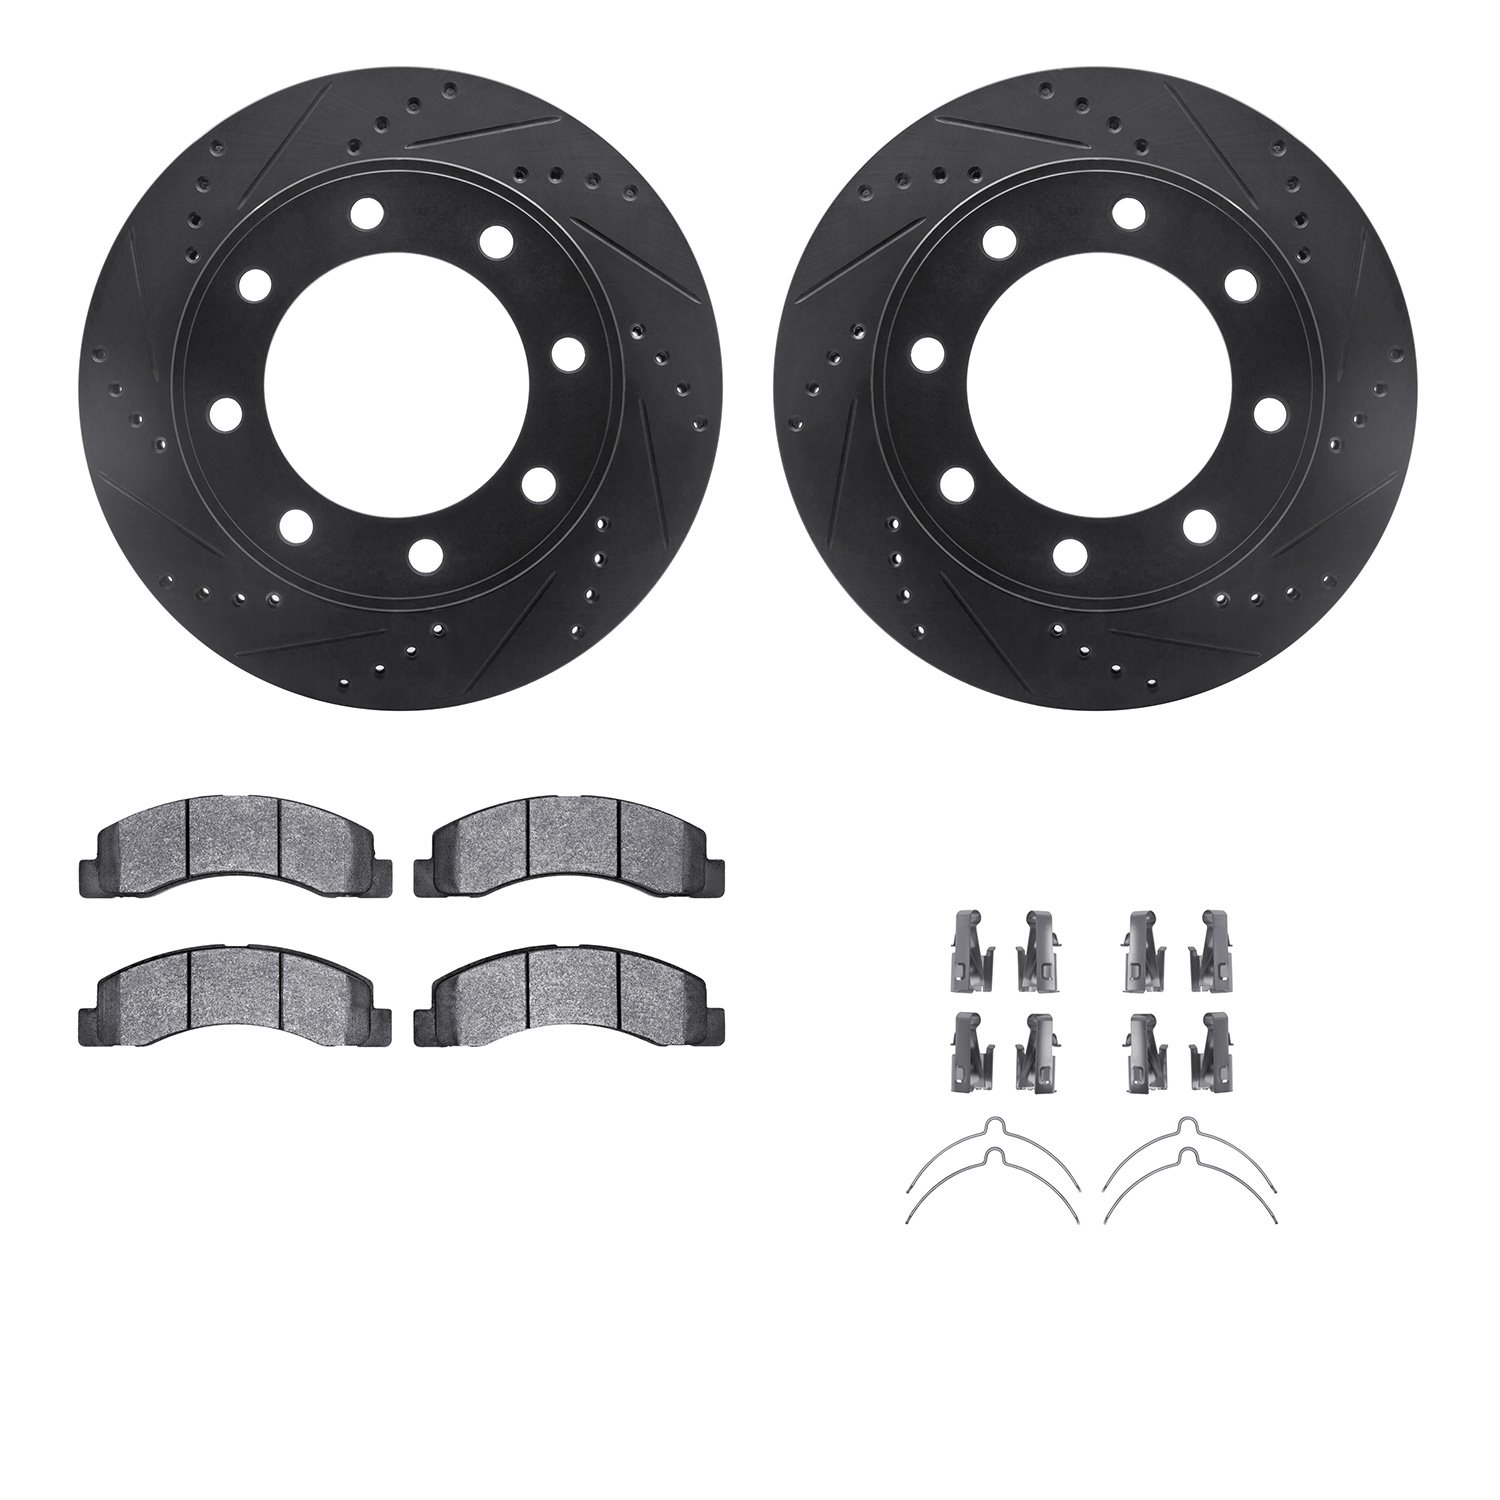 8412-54062 Drilled/Slotted Brake Rotors with Ultimate-Duty Brake Pads Kit & Hardware [Black], 1999-2005 Ford/Lincoln/Mercury/Maz